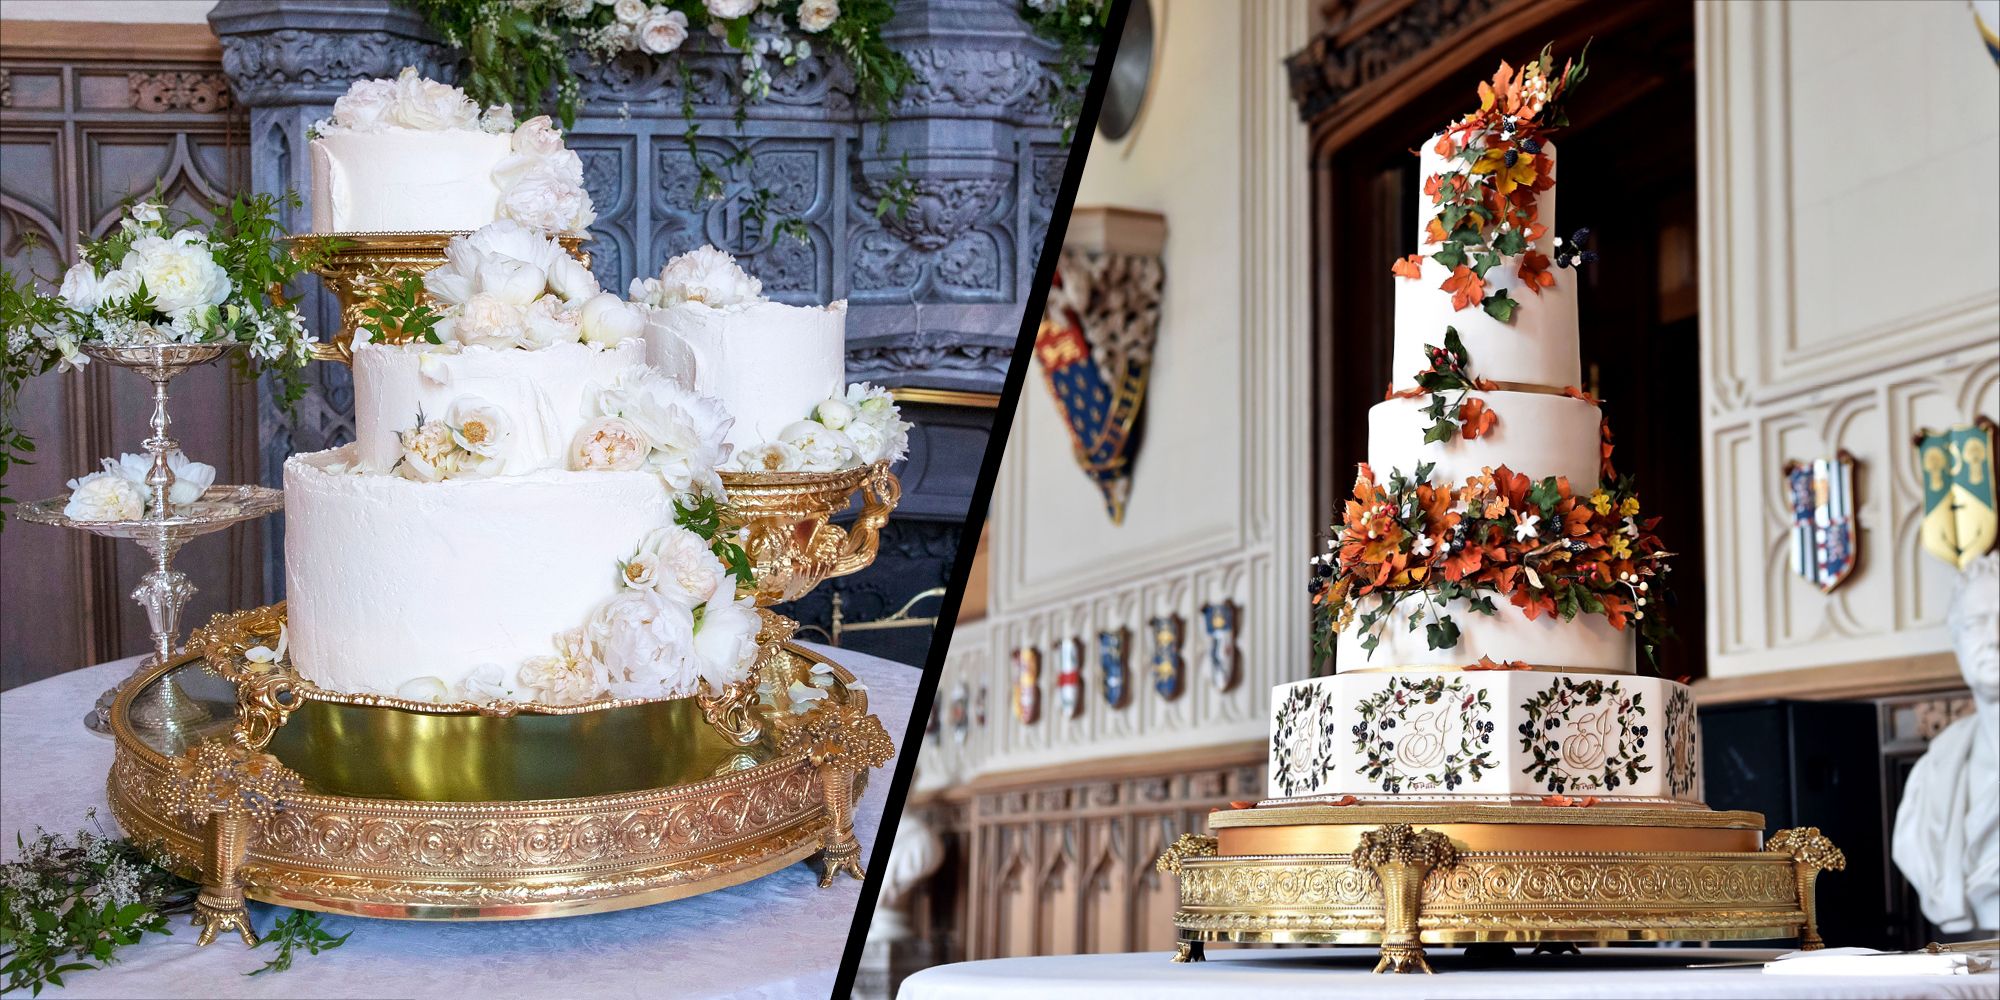 Brits are freaking out over Meghan Markle's wedding cake